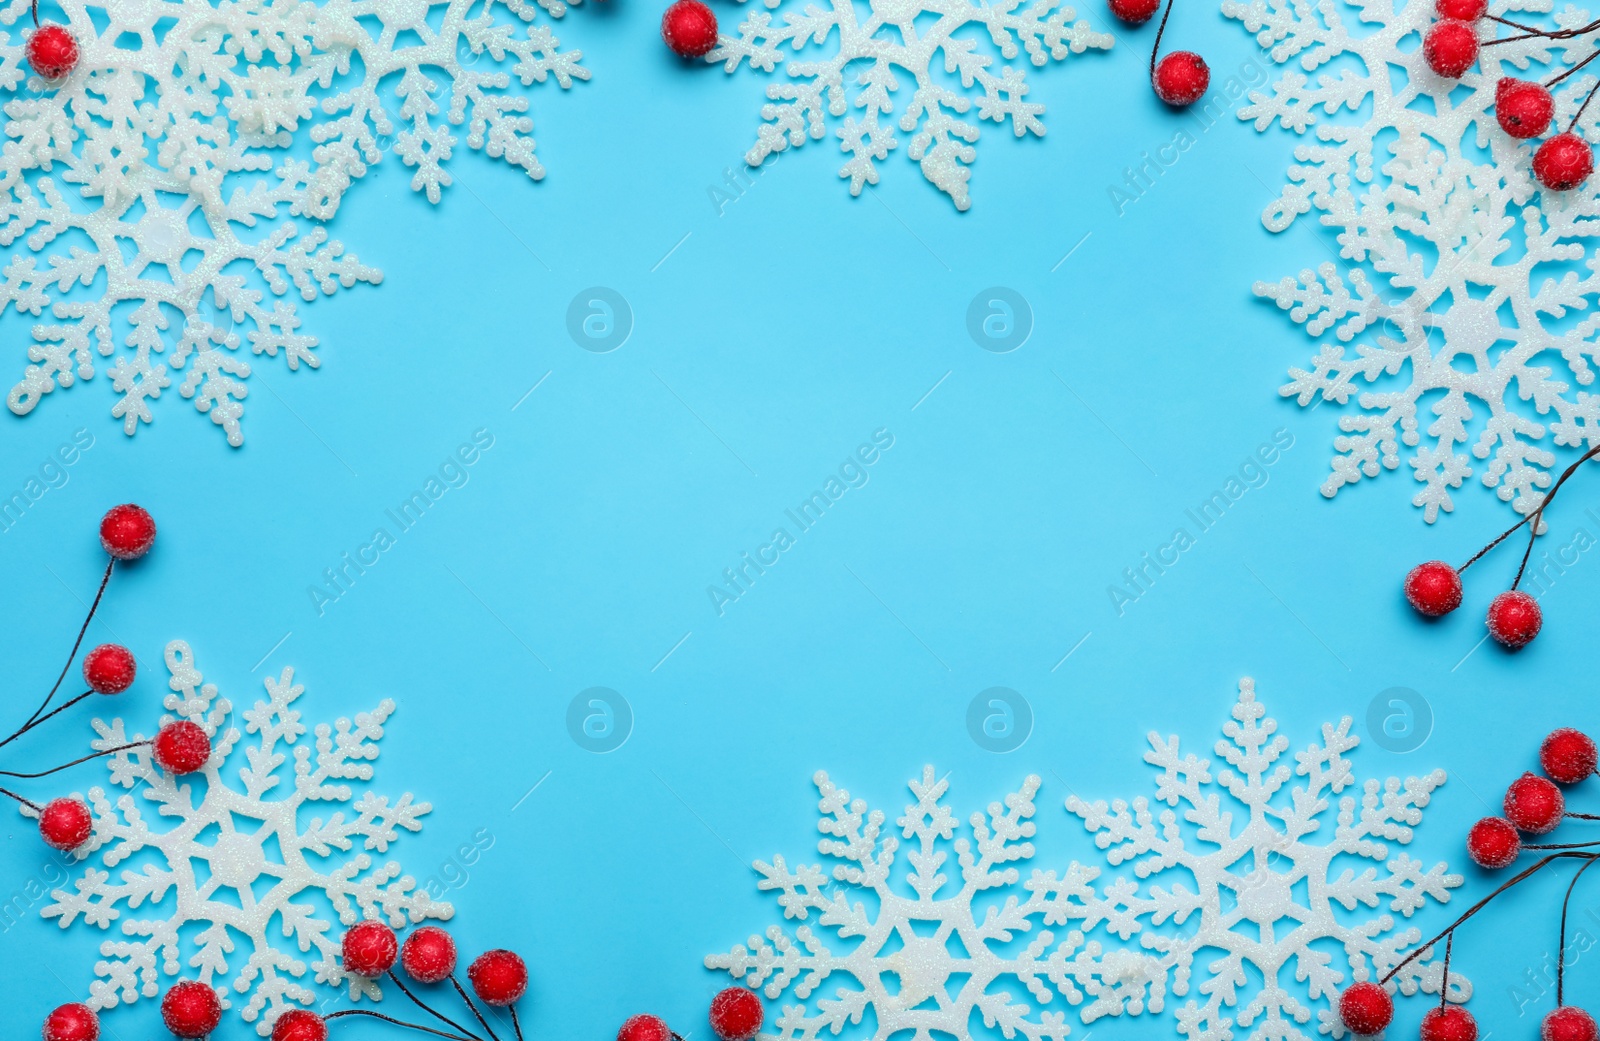 Photo of Beautiful decorative snowflakes and red berries on light blue background, flat lay. Space for text